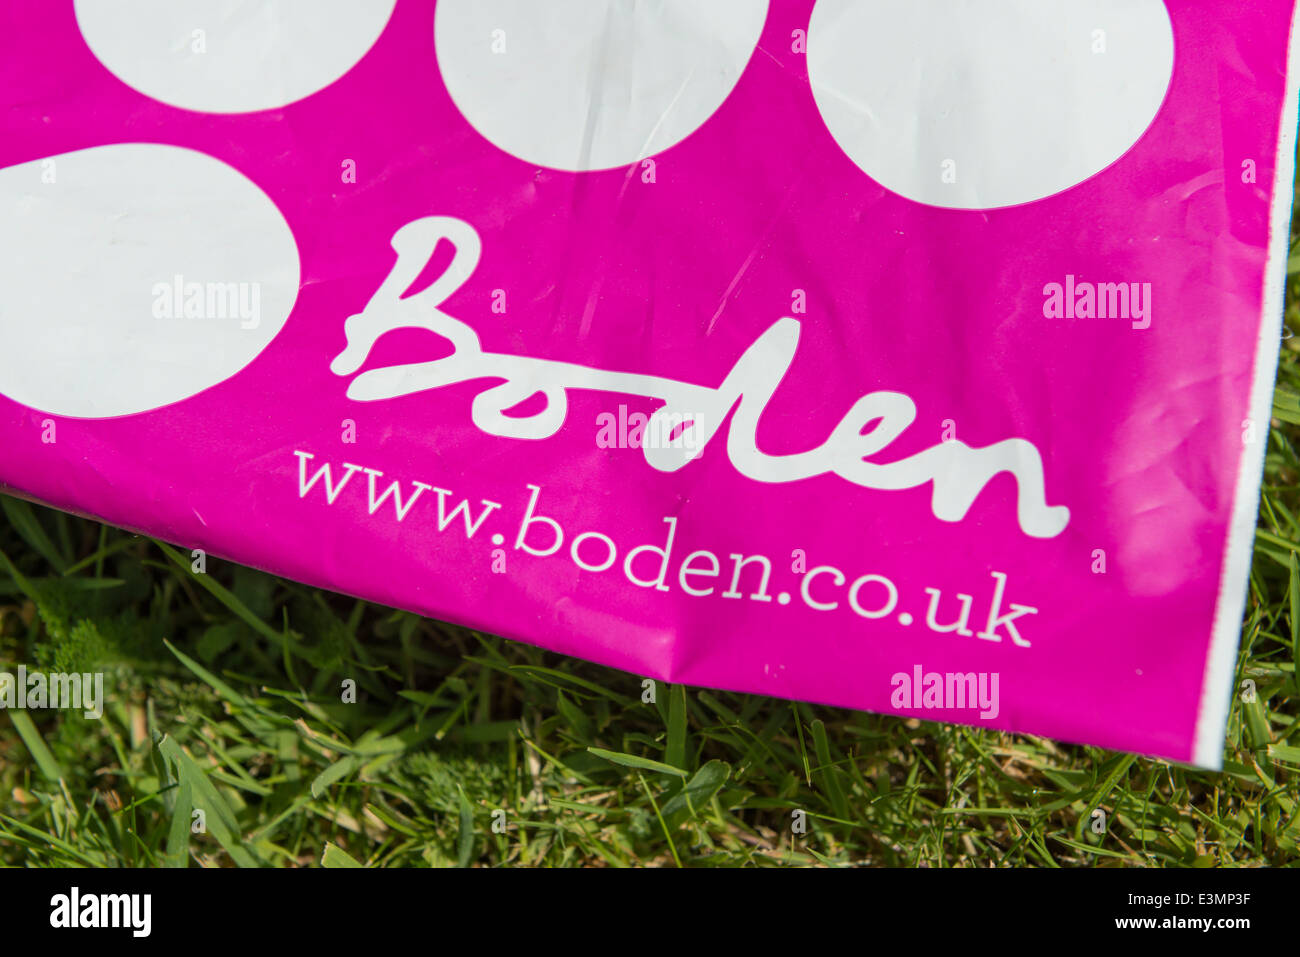 A delivery bag for clothing retailer Boden Stock Photo